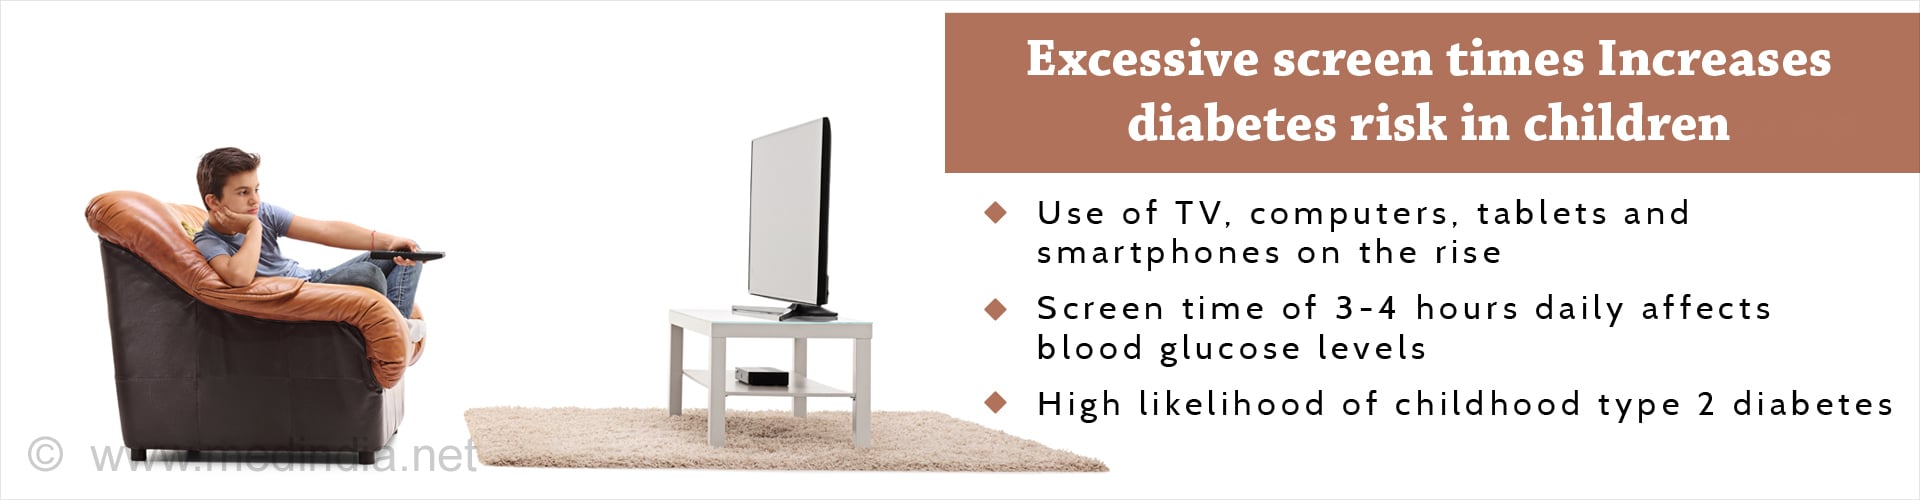 Excessive screen time
diabetes risk in children
- use of TV, computers, tablets and smartphones on the rise
- screen time of 3-4 hours daily affects blood glucose levels
- high likelihood of childhood type 2 diabetes